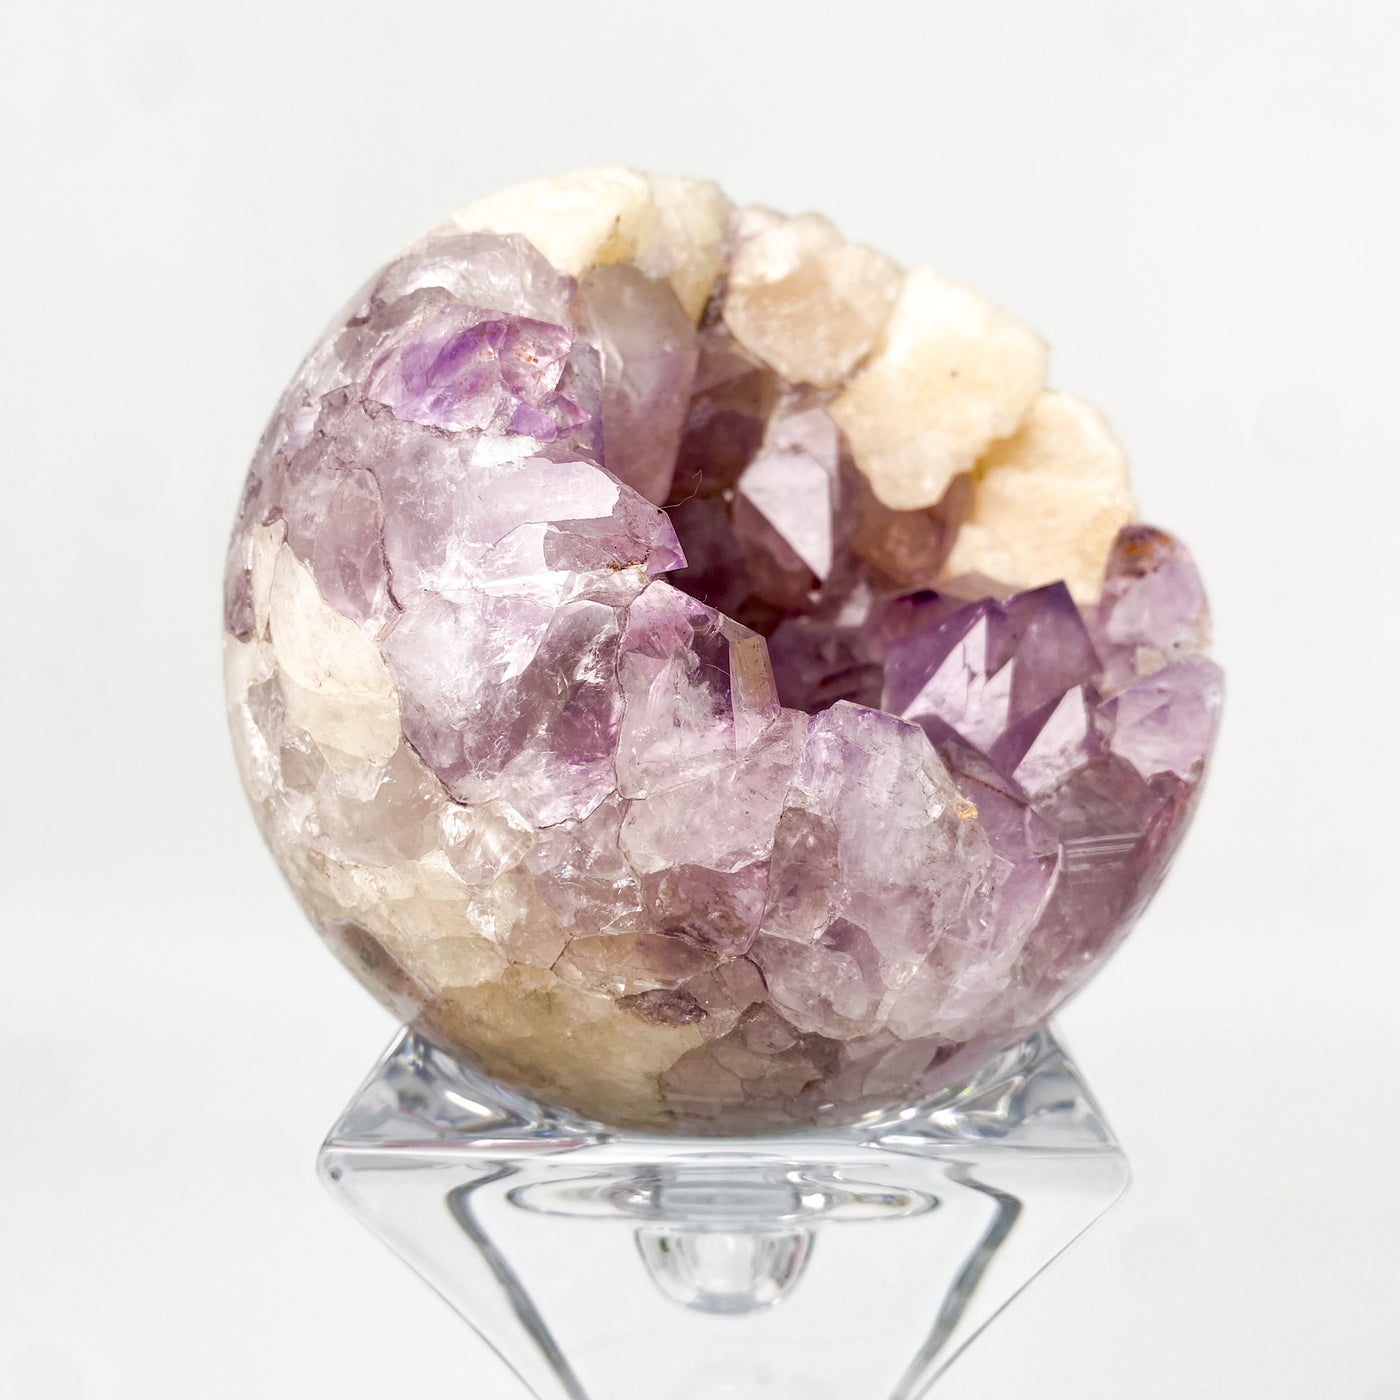 Amethyst sphere with Calcite inclusion